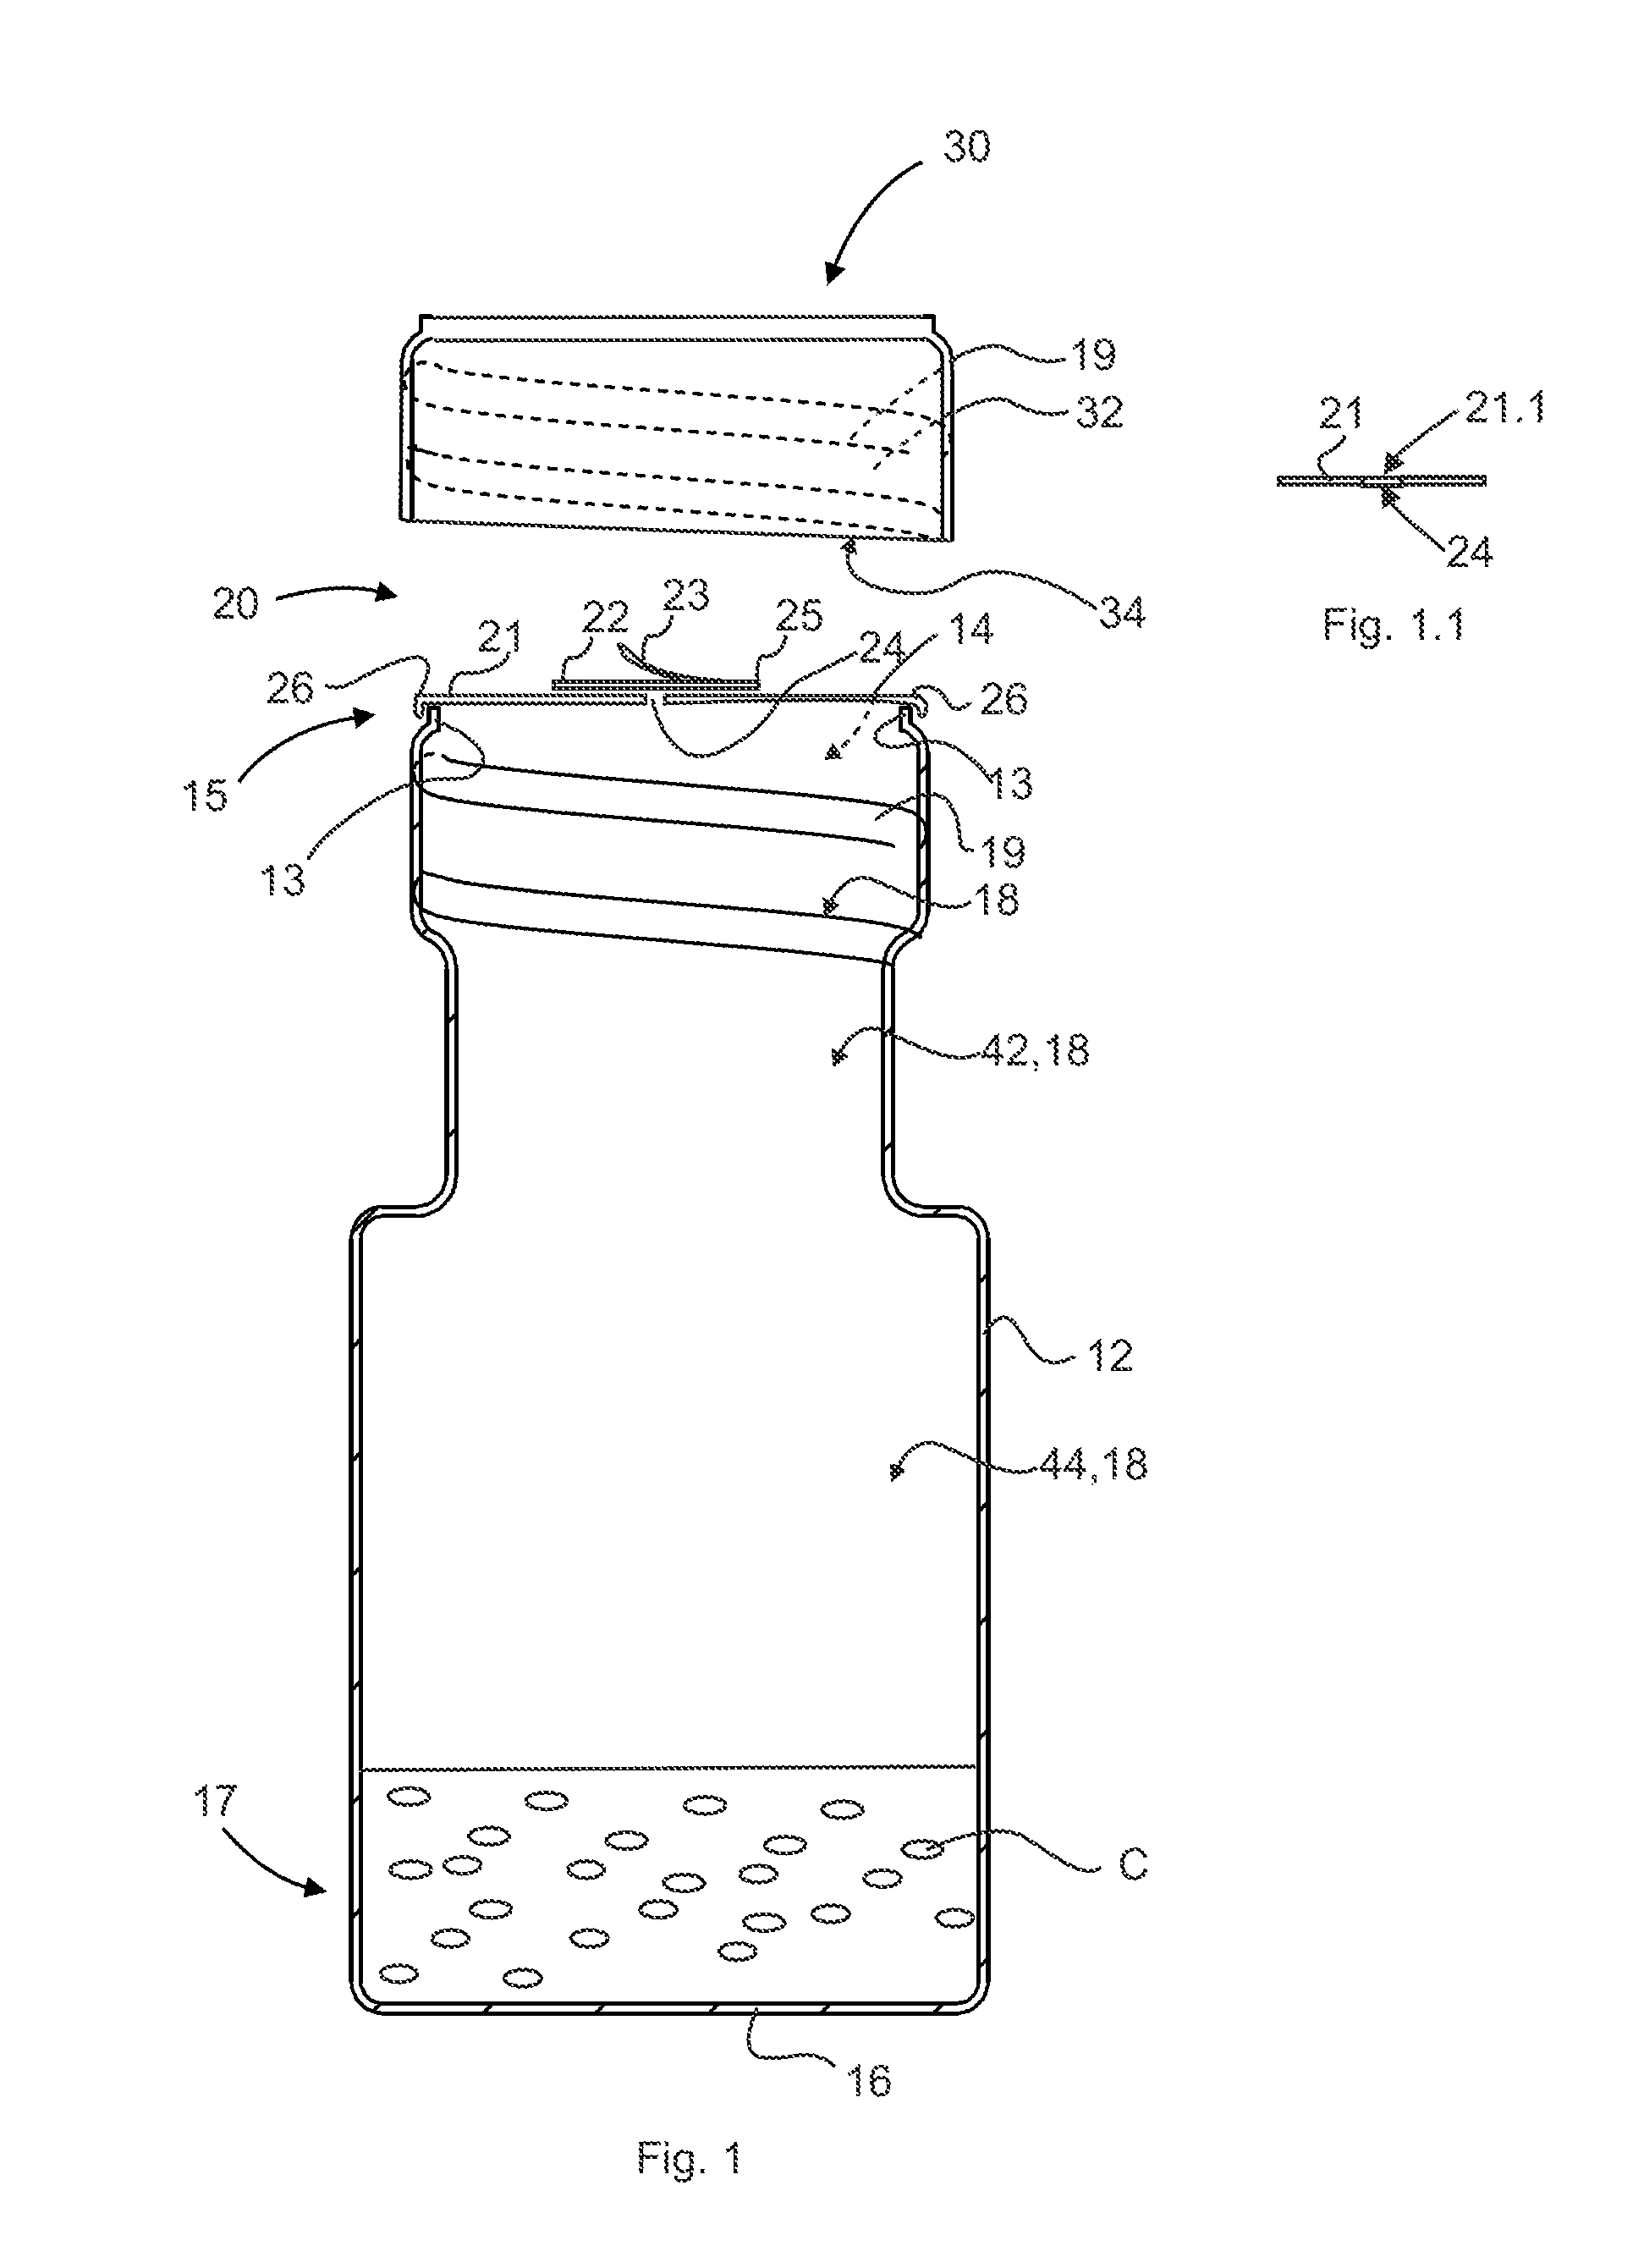 Drizzle safety seal and methods of use